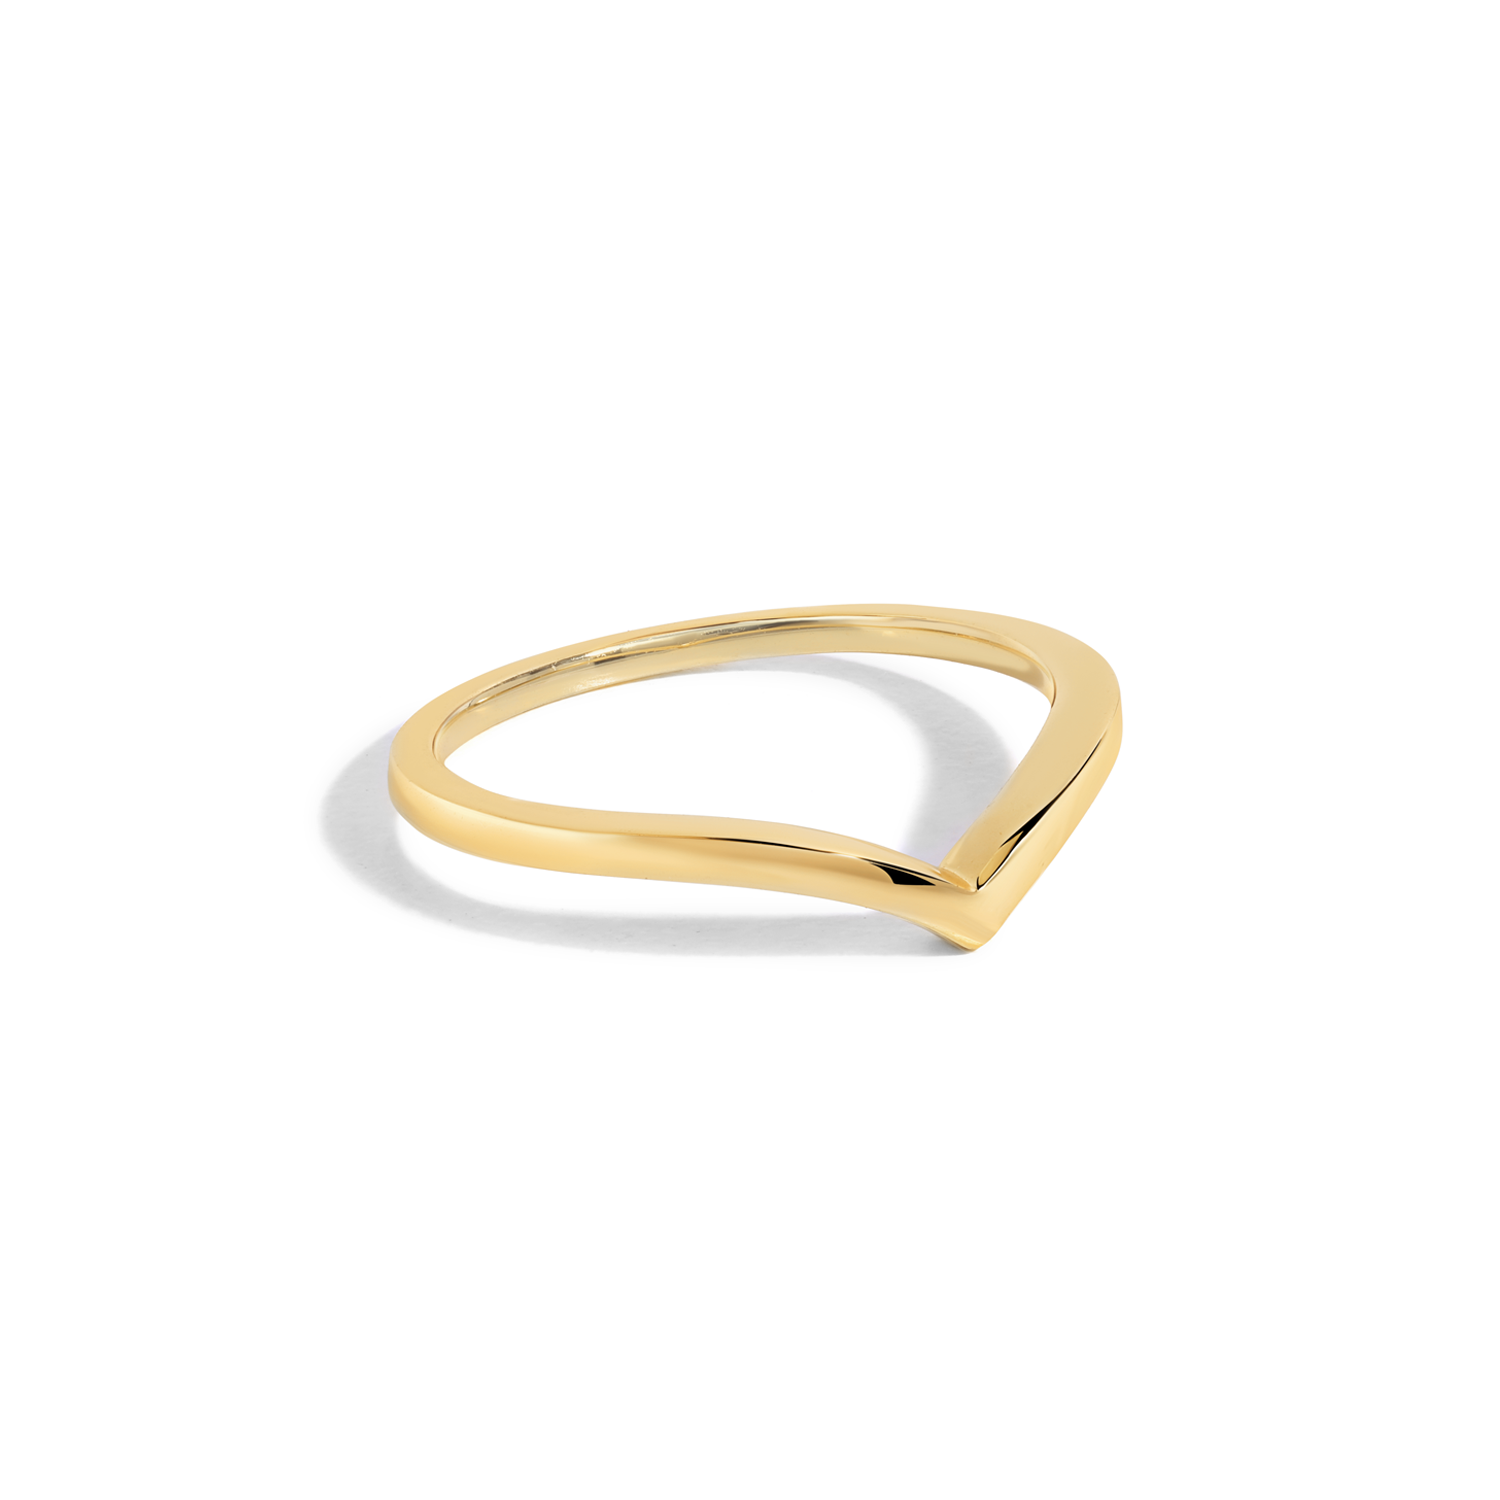 Elegant and classy double ring set in gold.